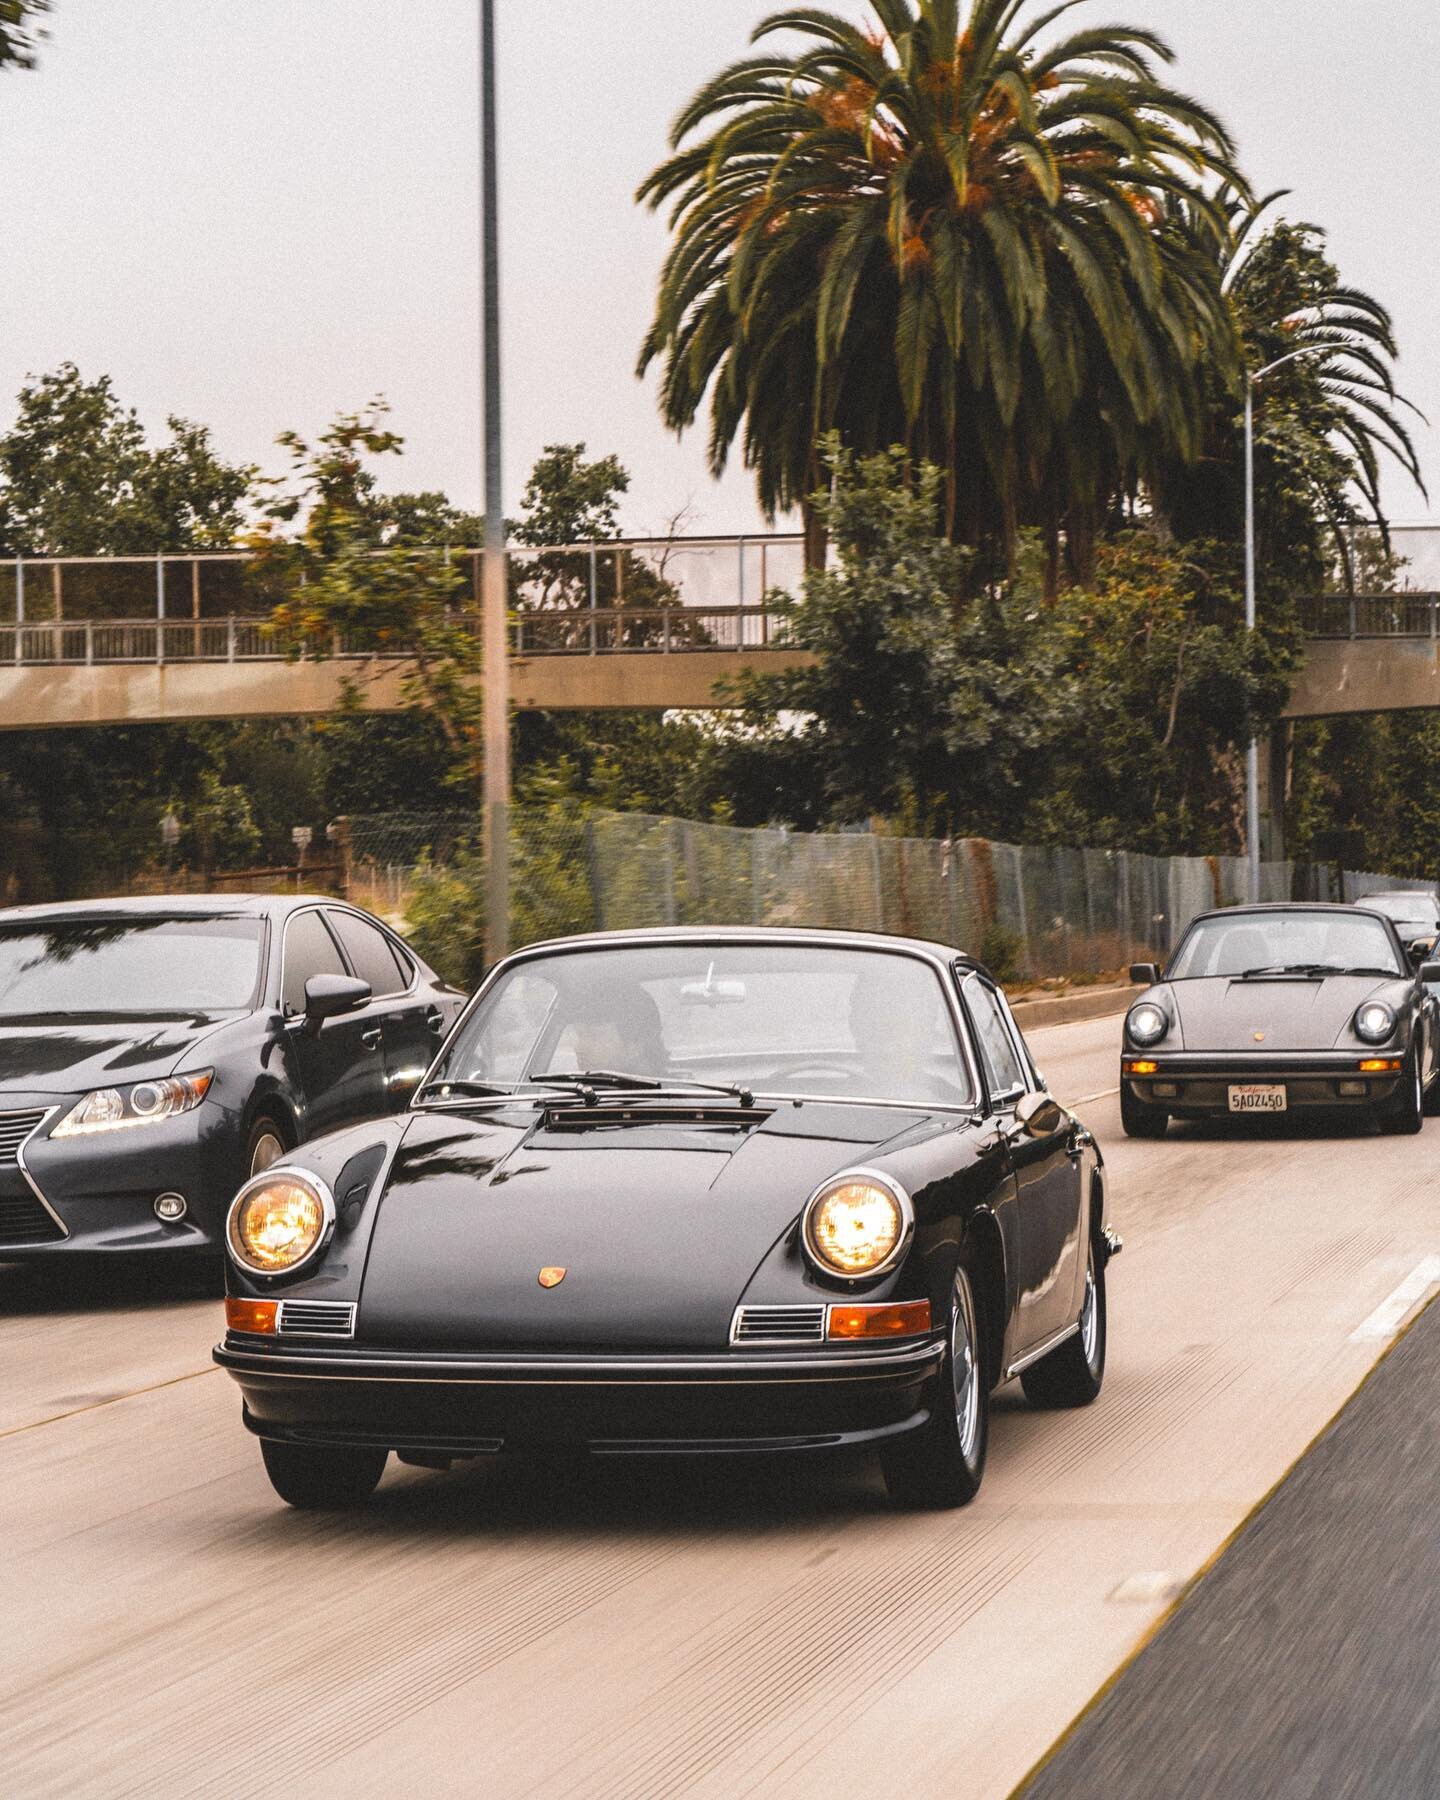 🌴 Carrera Arroyo 2023 
📷 @threefiftychick 

Regards to @threefiftychick for capturing this image while hanging out the passenger side of a vehicle. Complete dedication to her craft. 

#porsche912